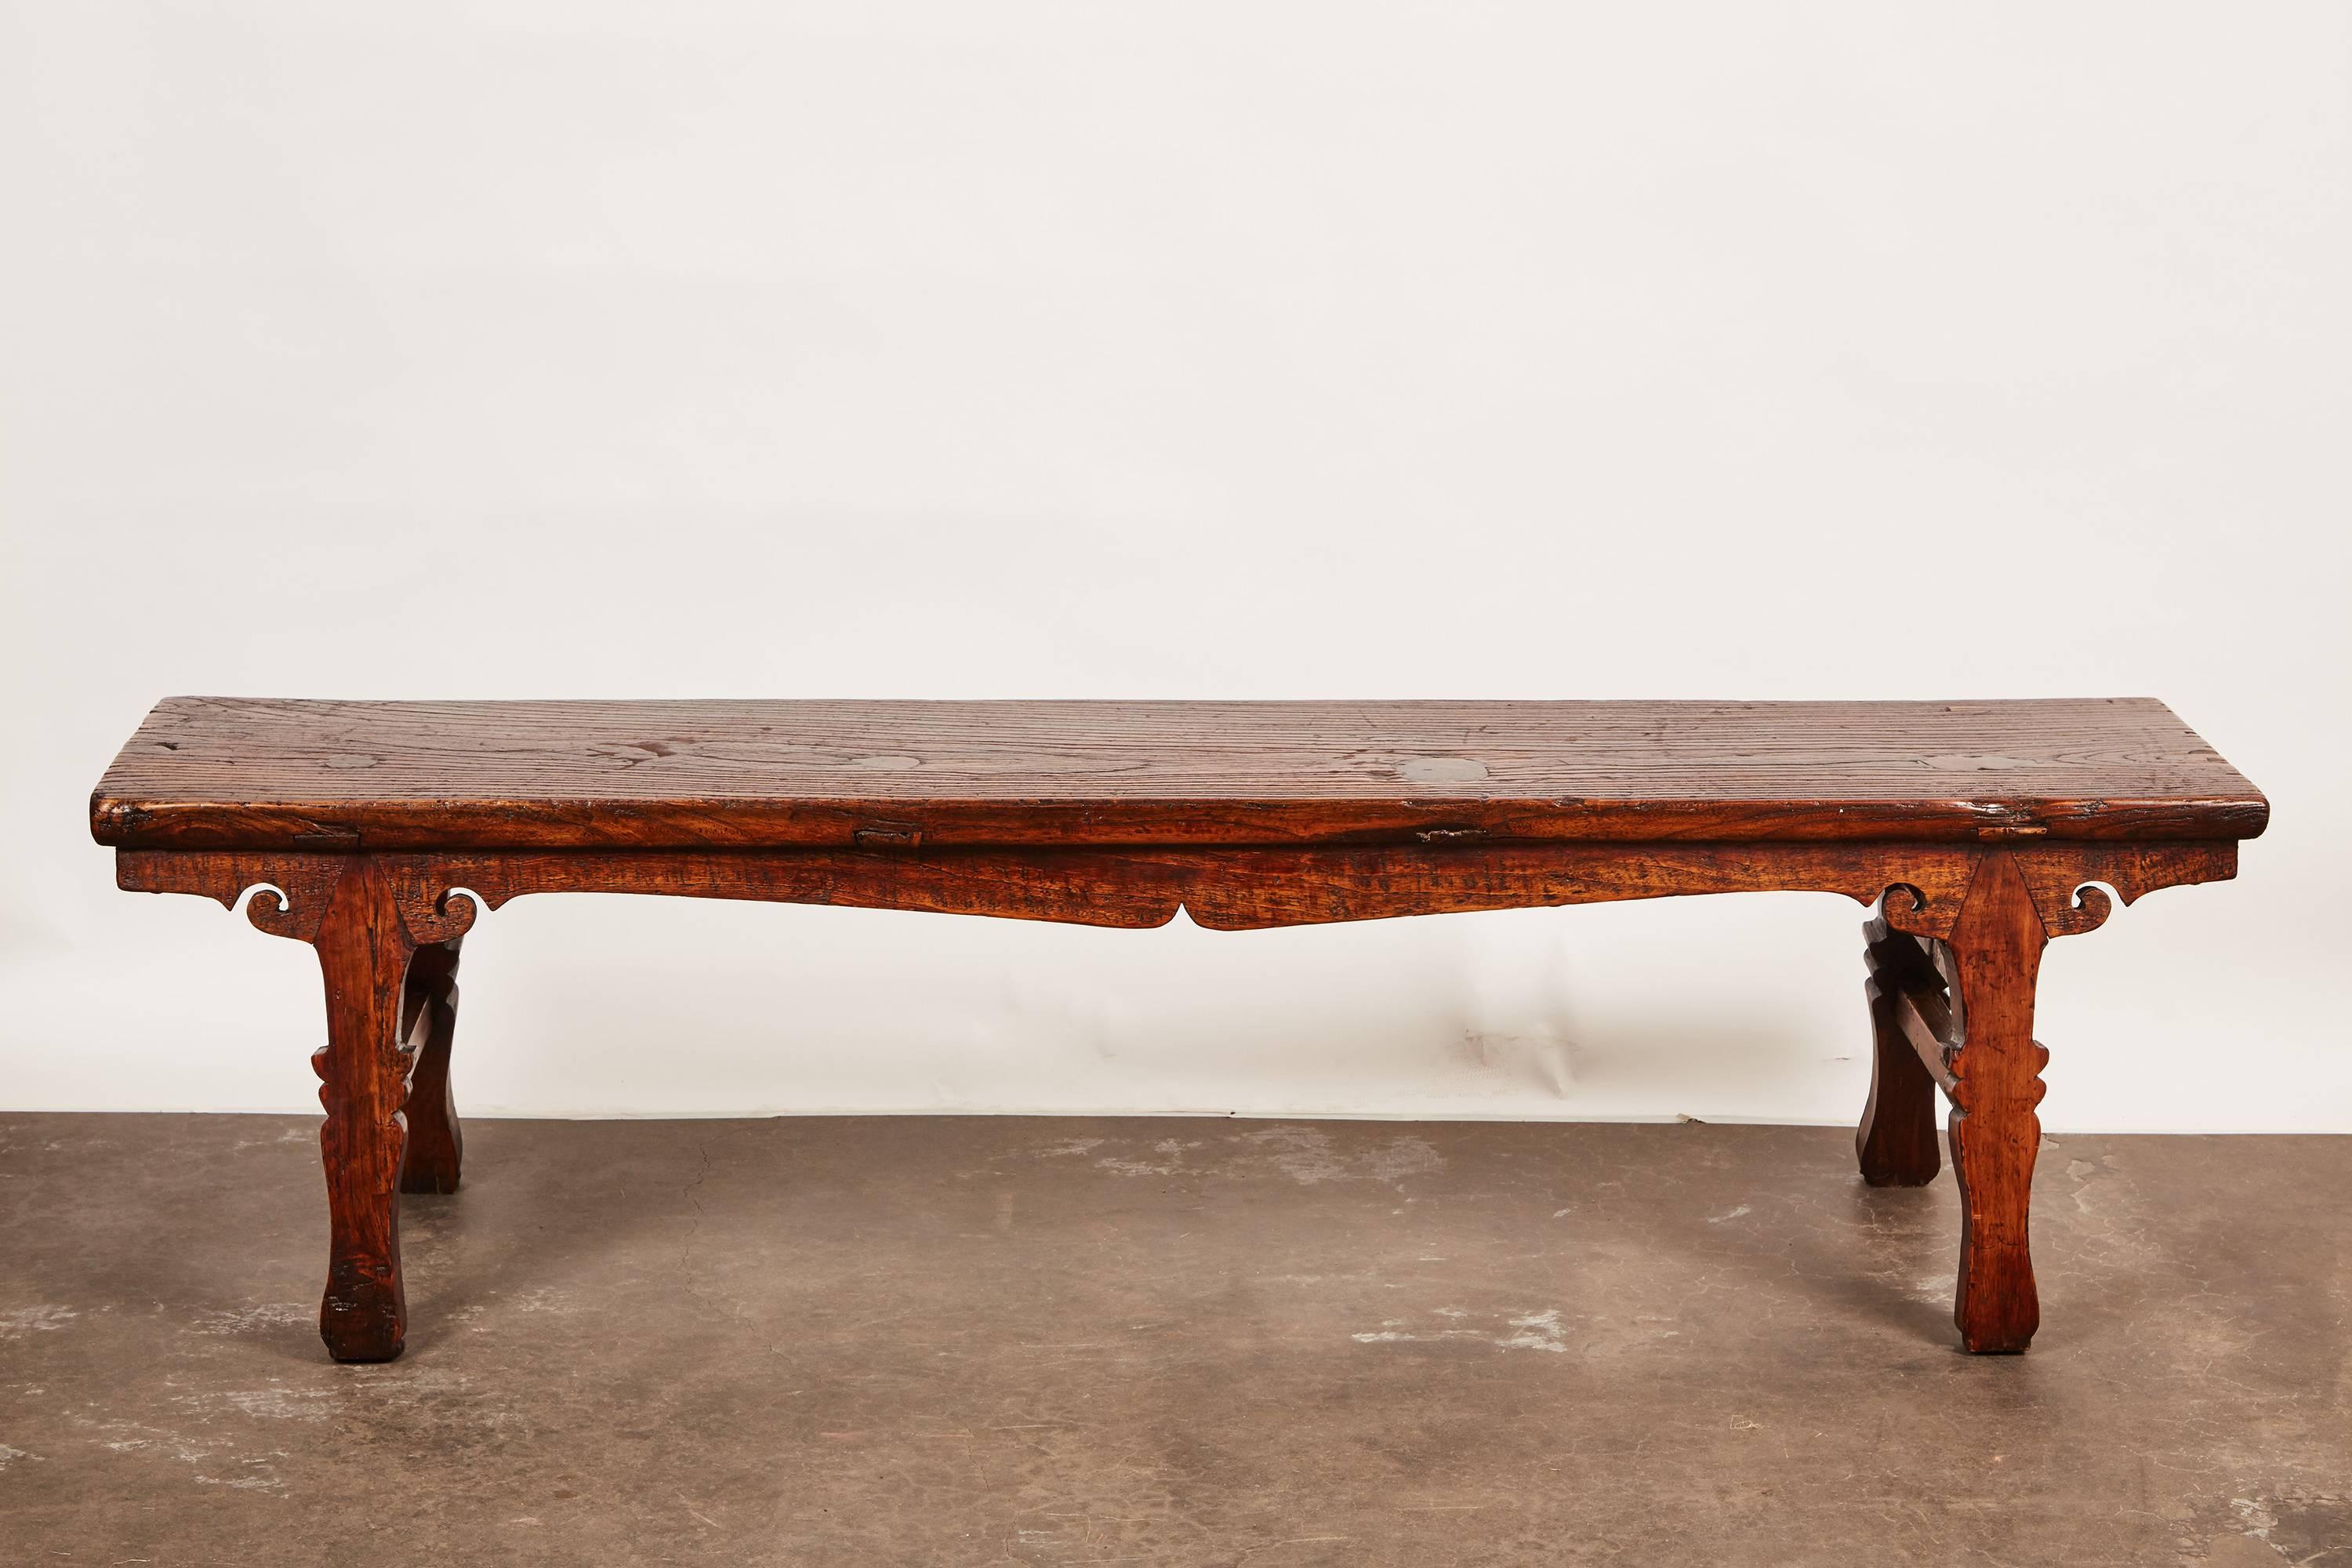 An 18th century Chinese low sword leg bench or table with intricate carvings all along the legs.